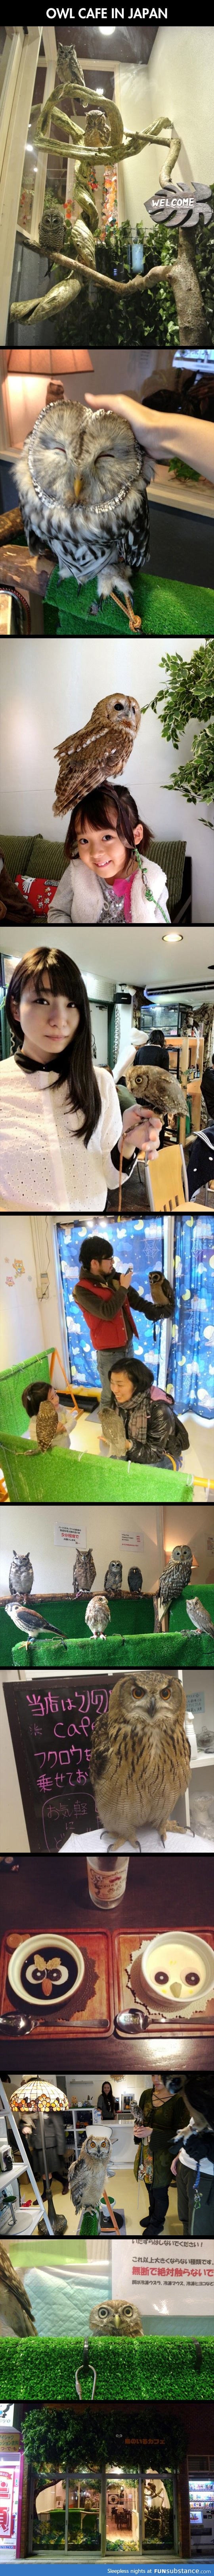 There is an owl cafe in Japan